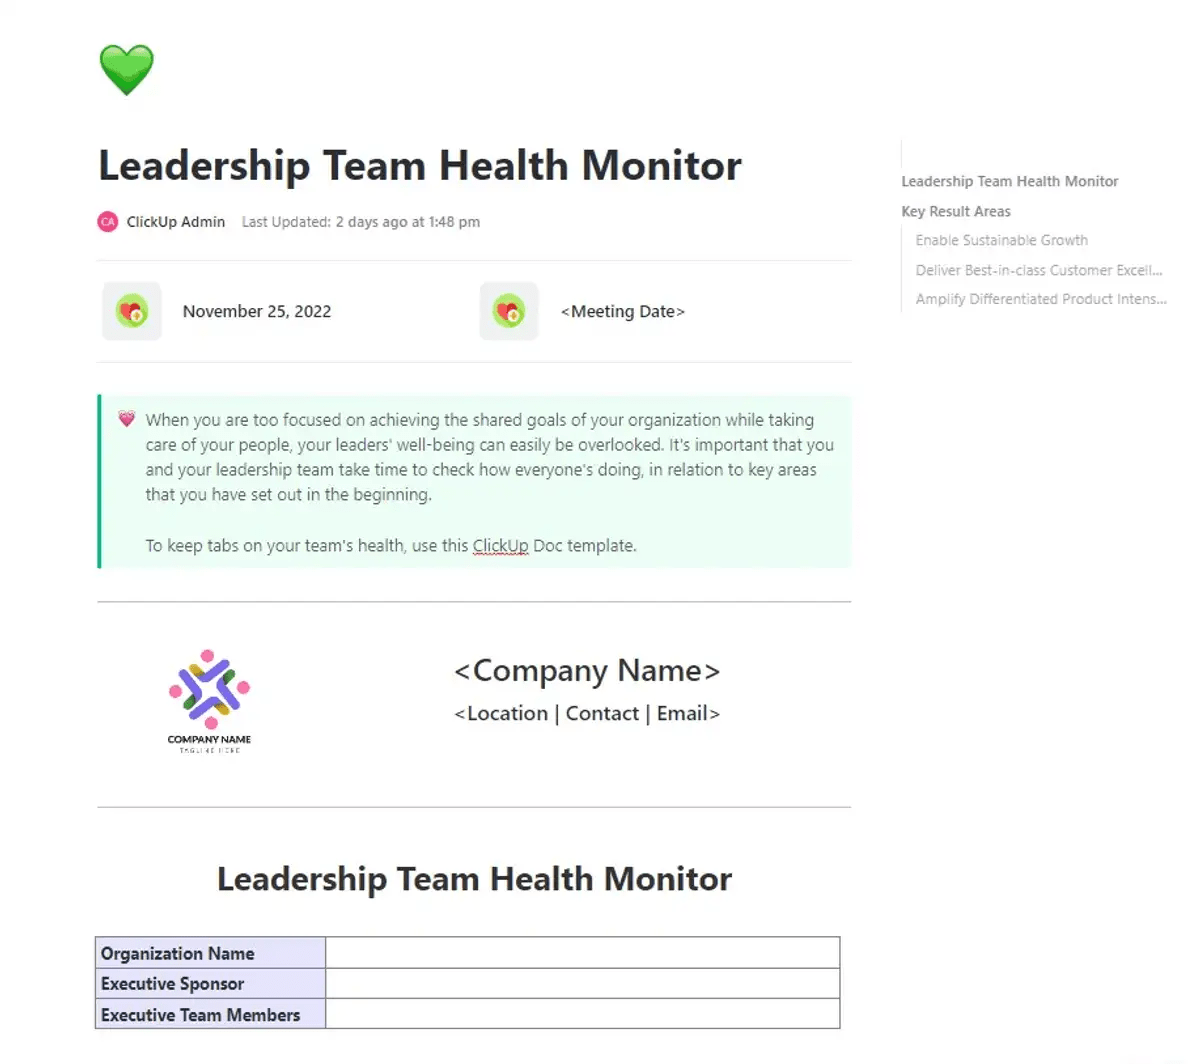 ClickUp's Leadership Team Health Monitor Template is designed to help you monitor the overall health of your leadership team.